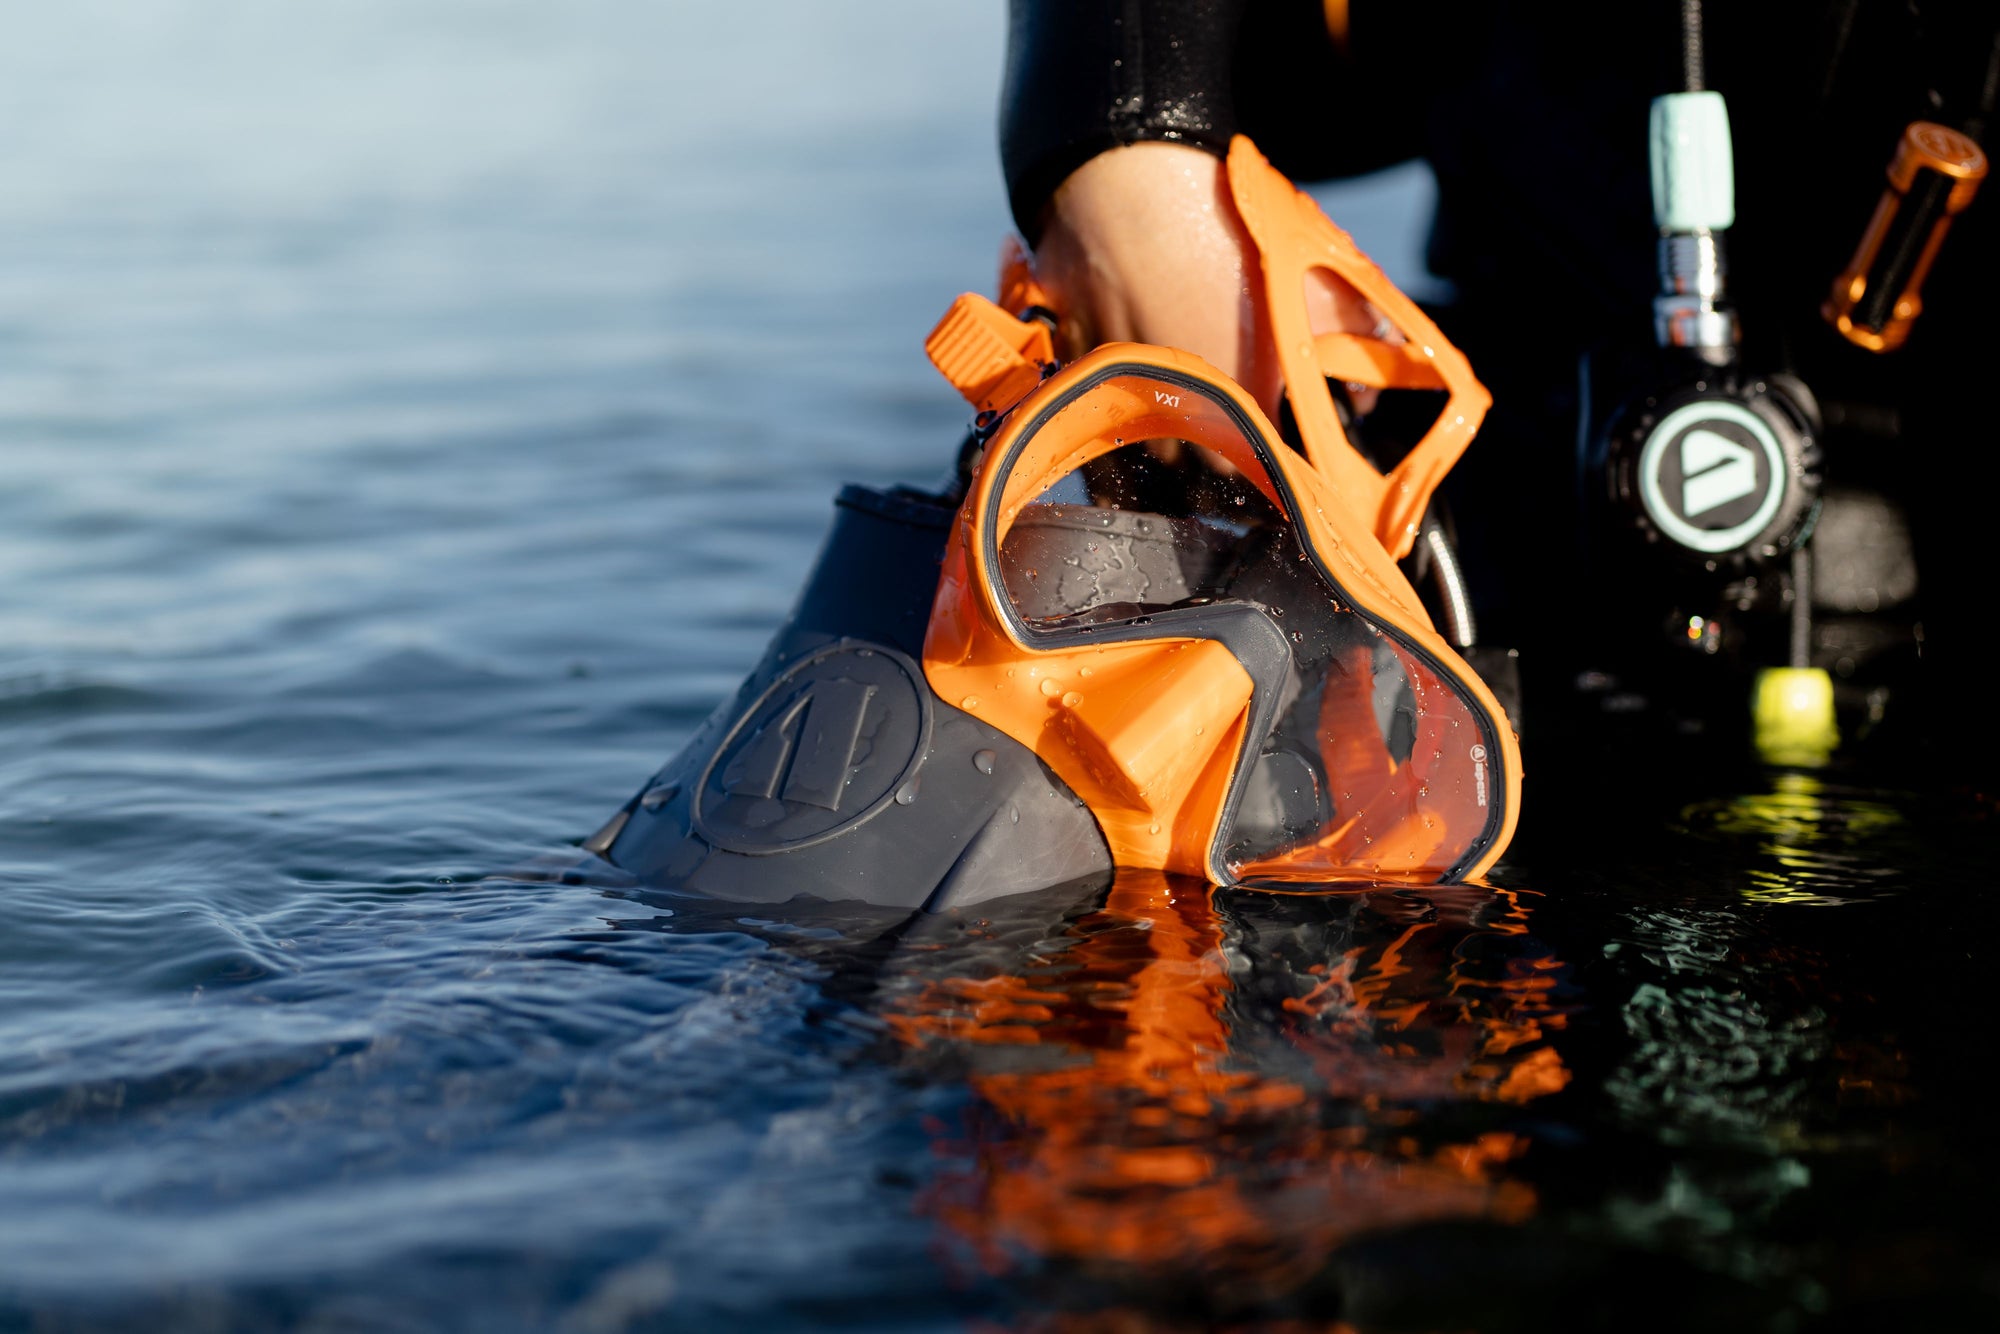 Getting To Know Apeks: Technically Inspired Dive Gear